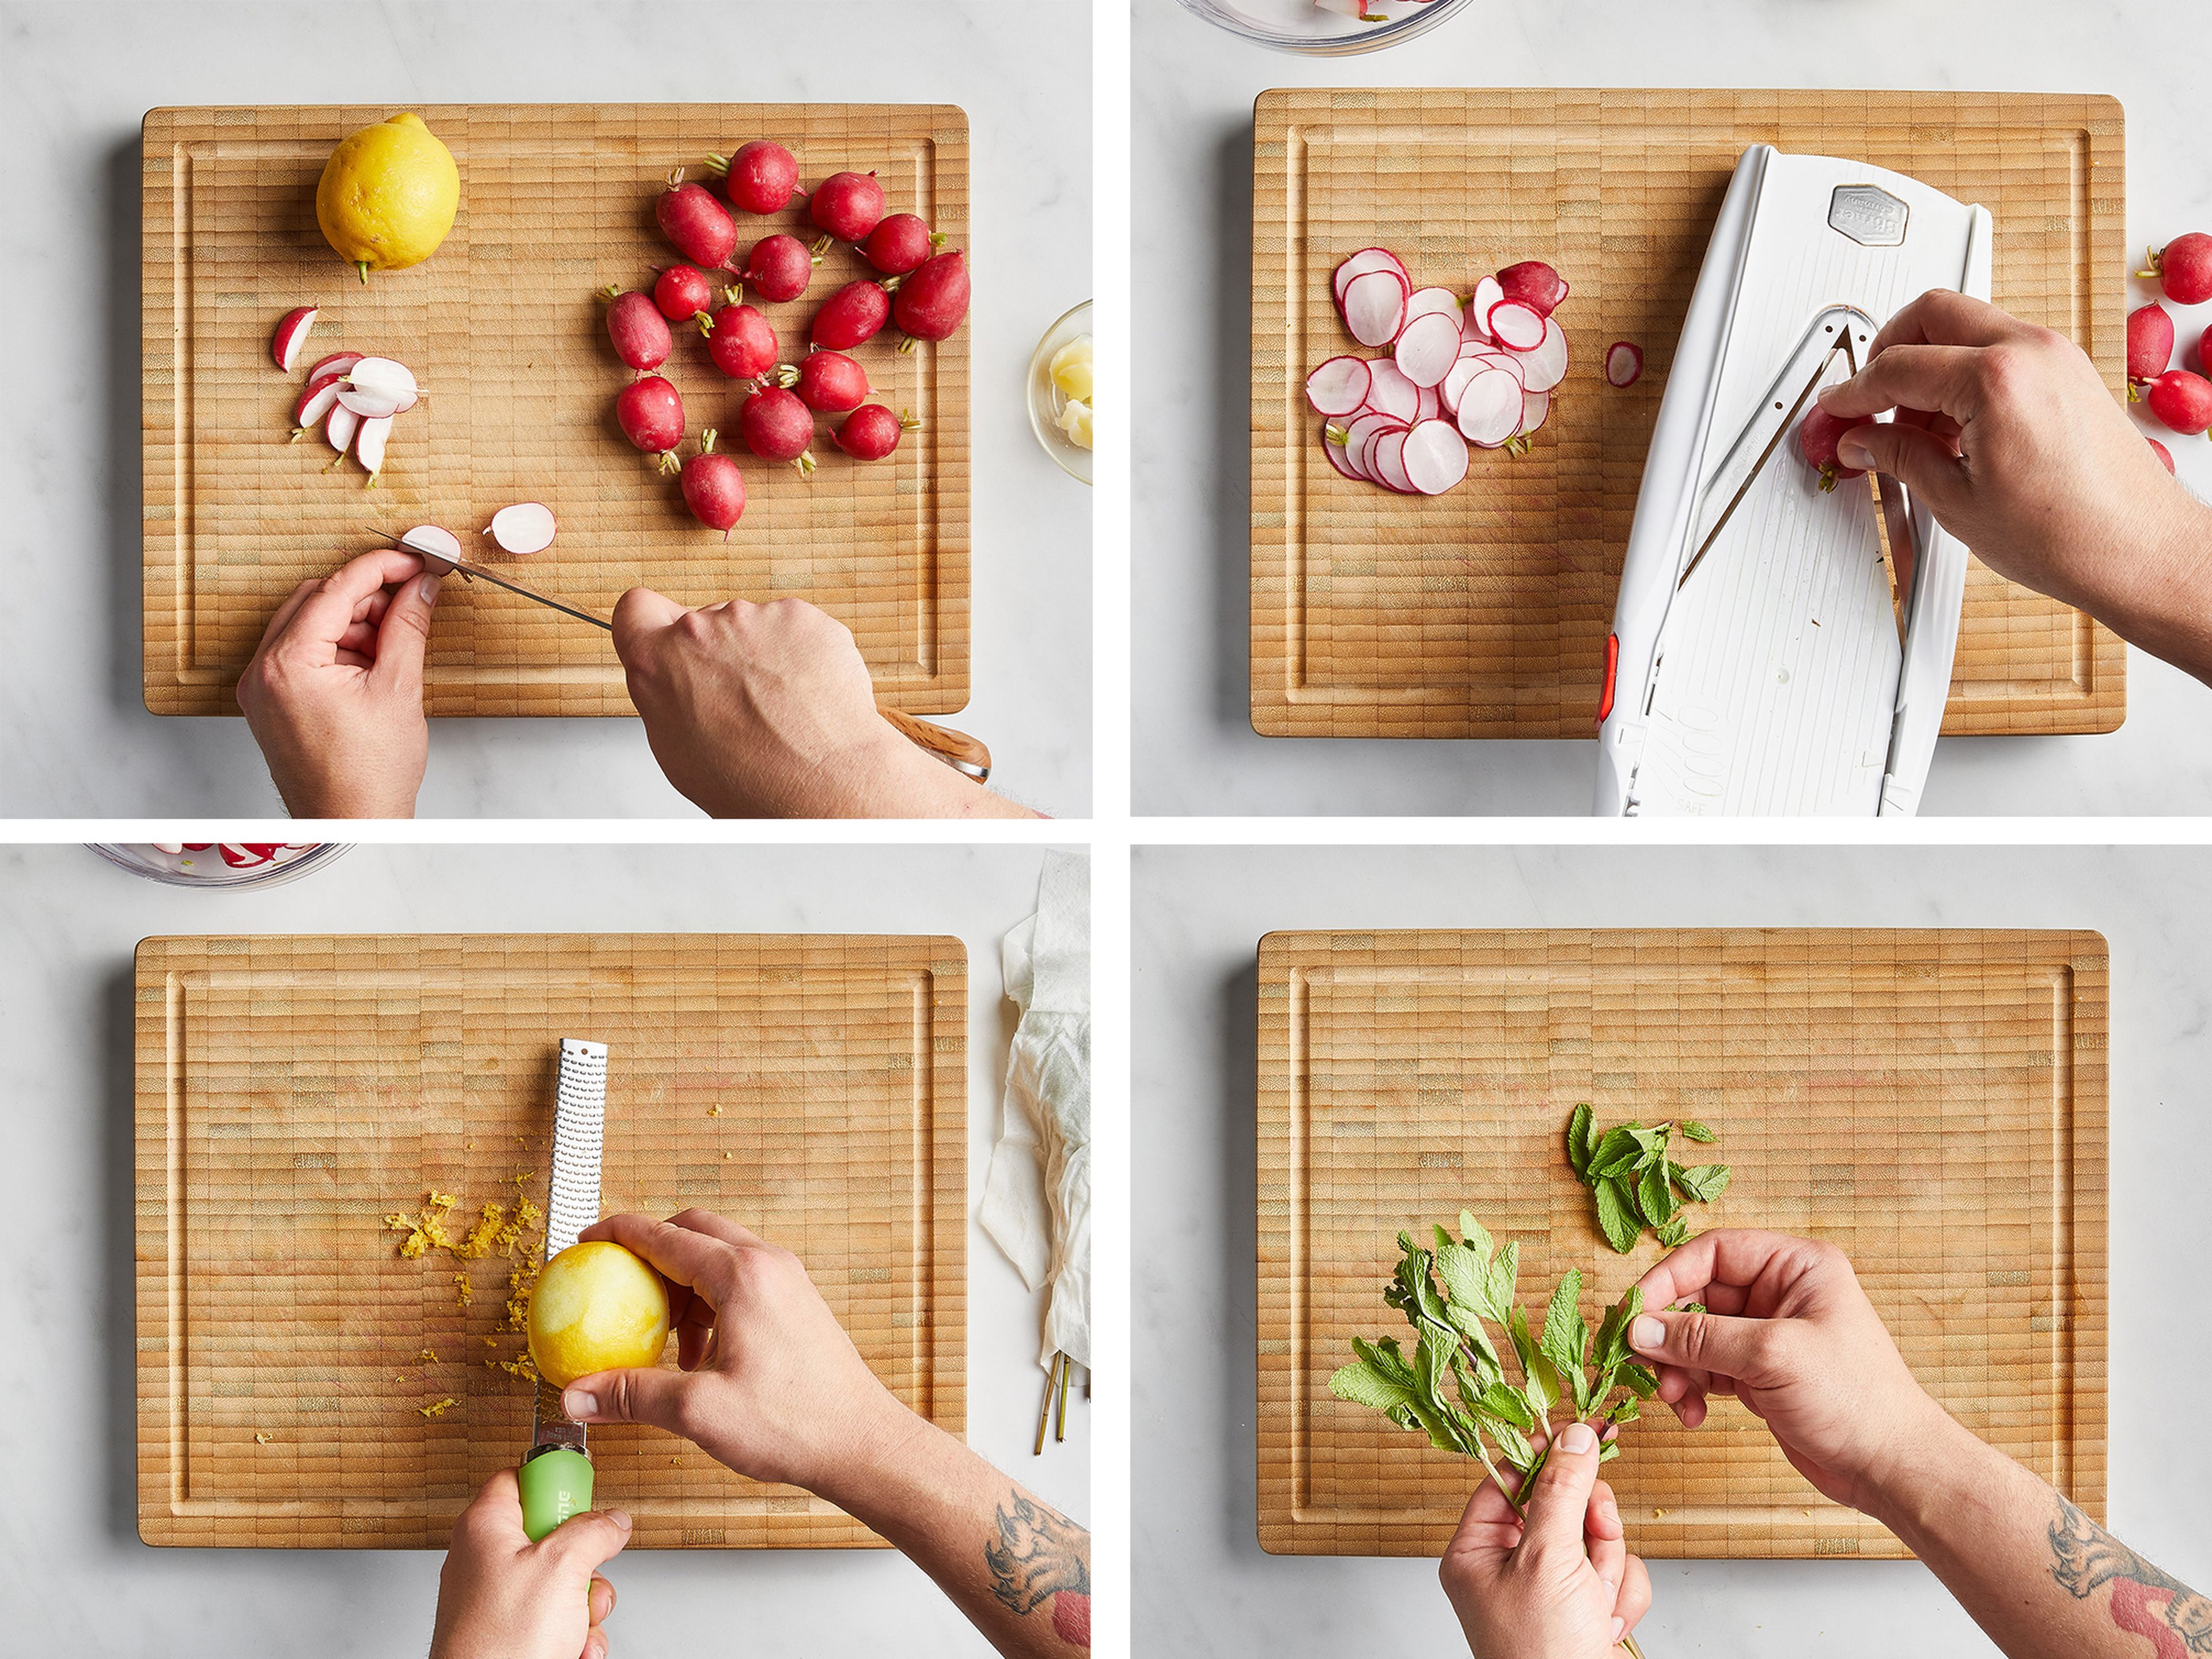 Thinly slice half the radishes with a knife or mandoline. Leave some small radishes whole, and slice other radishes into thin wedges. Zest and juice lemon into a small bowl. Pluck mint leaves and set aside for serving.